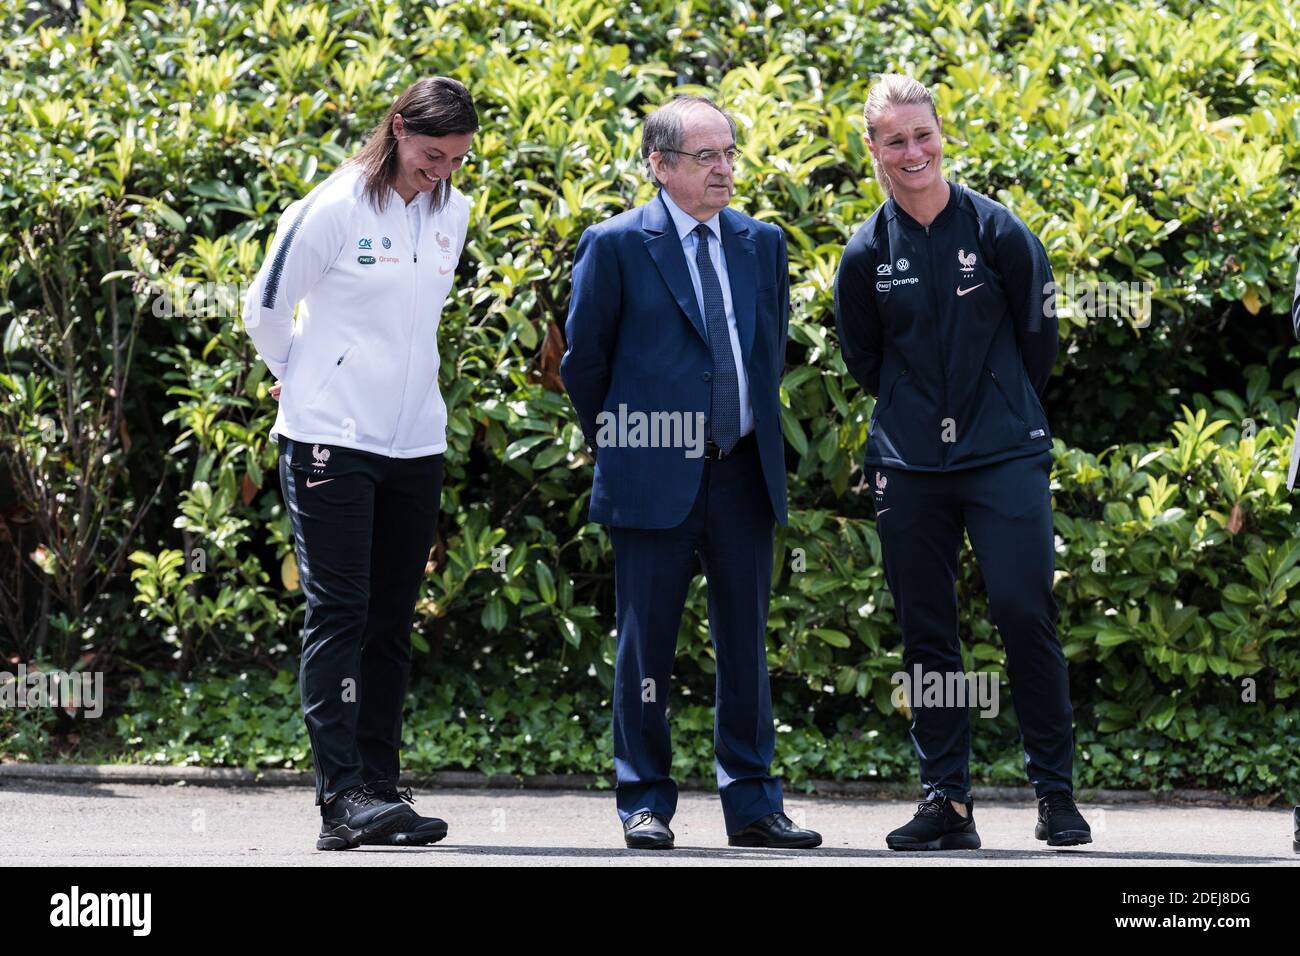 Corinne Diacre, Head coach of French Women Football Team, Noel Le Graet,  President of French Football Federation and Amandine Henry, team captain,  during the visit of President Emmanuel Macron and his wife